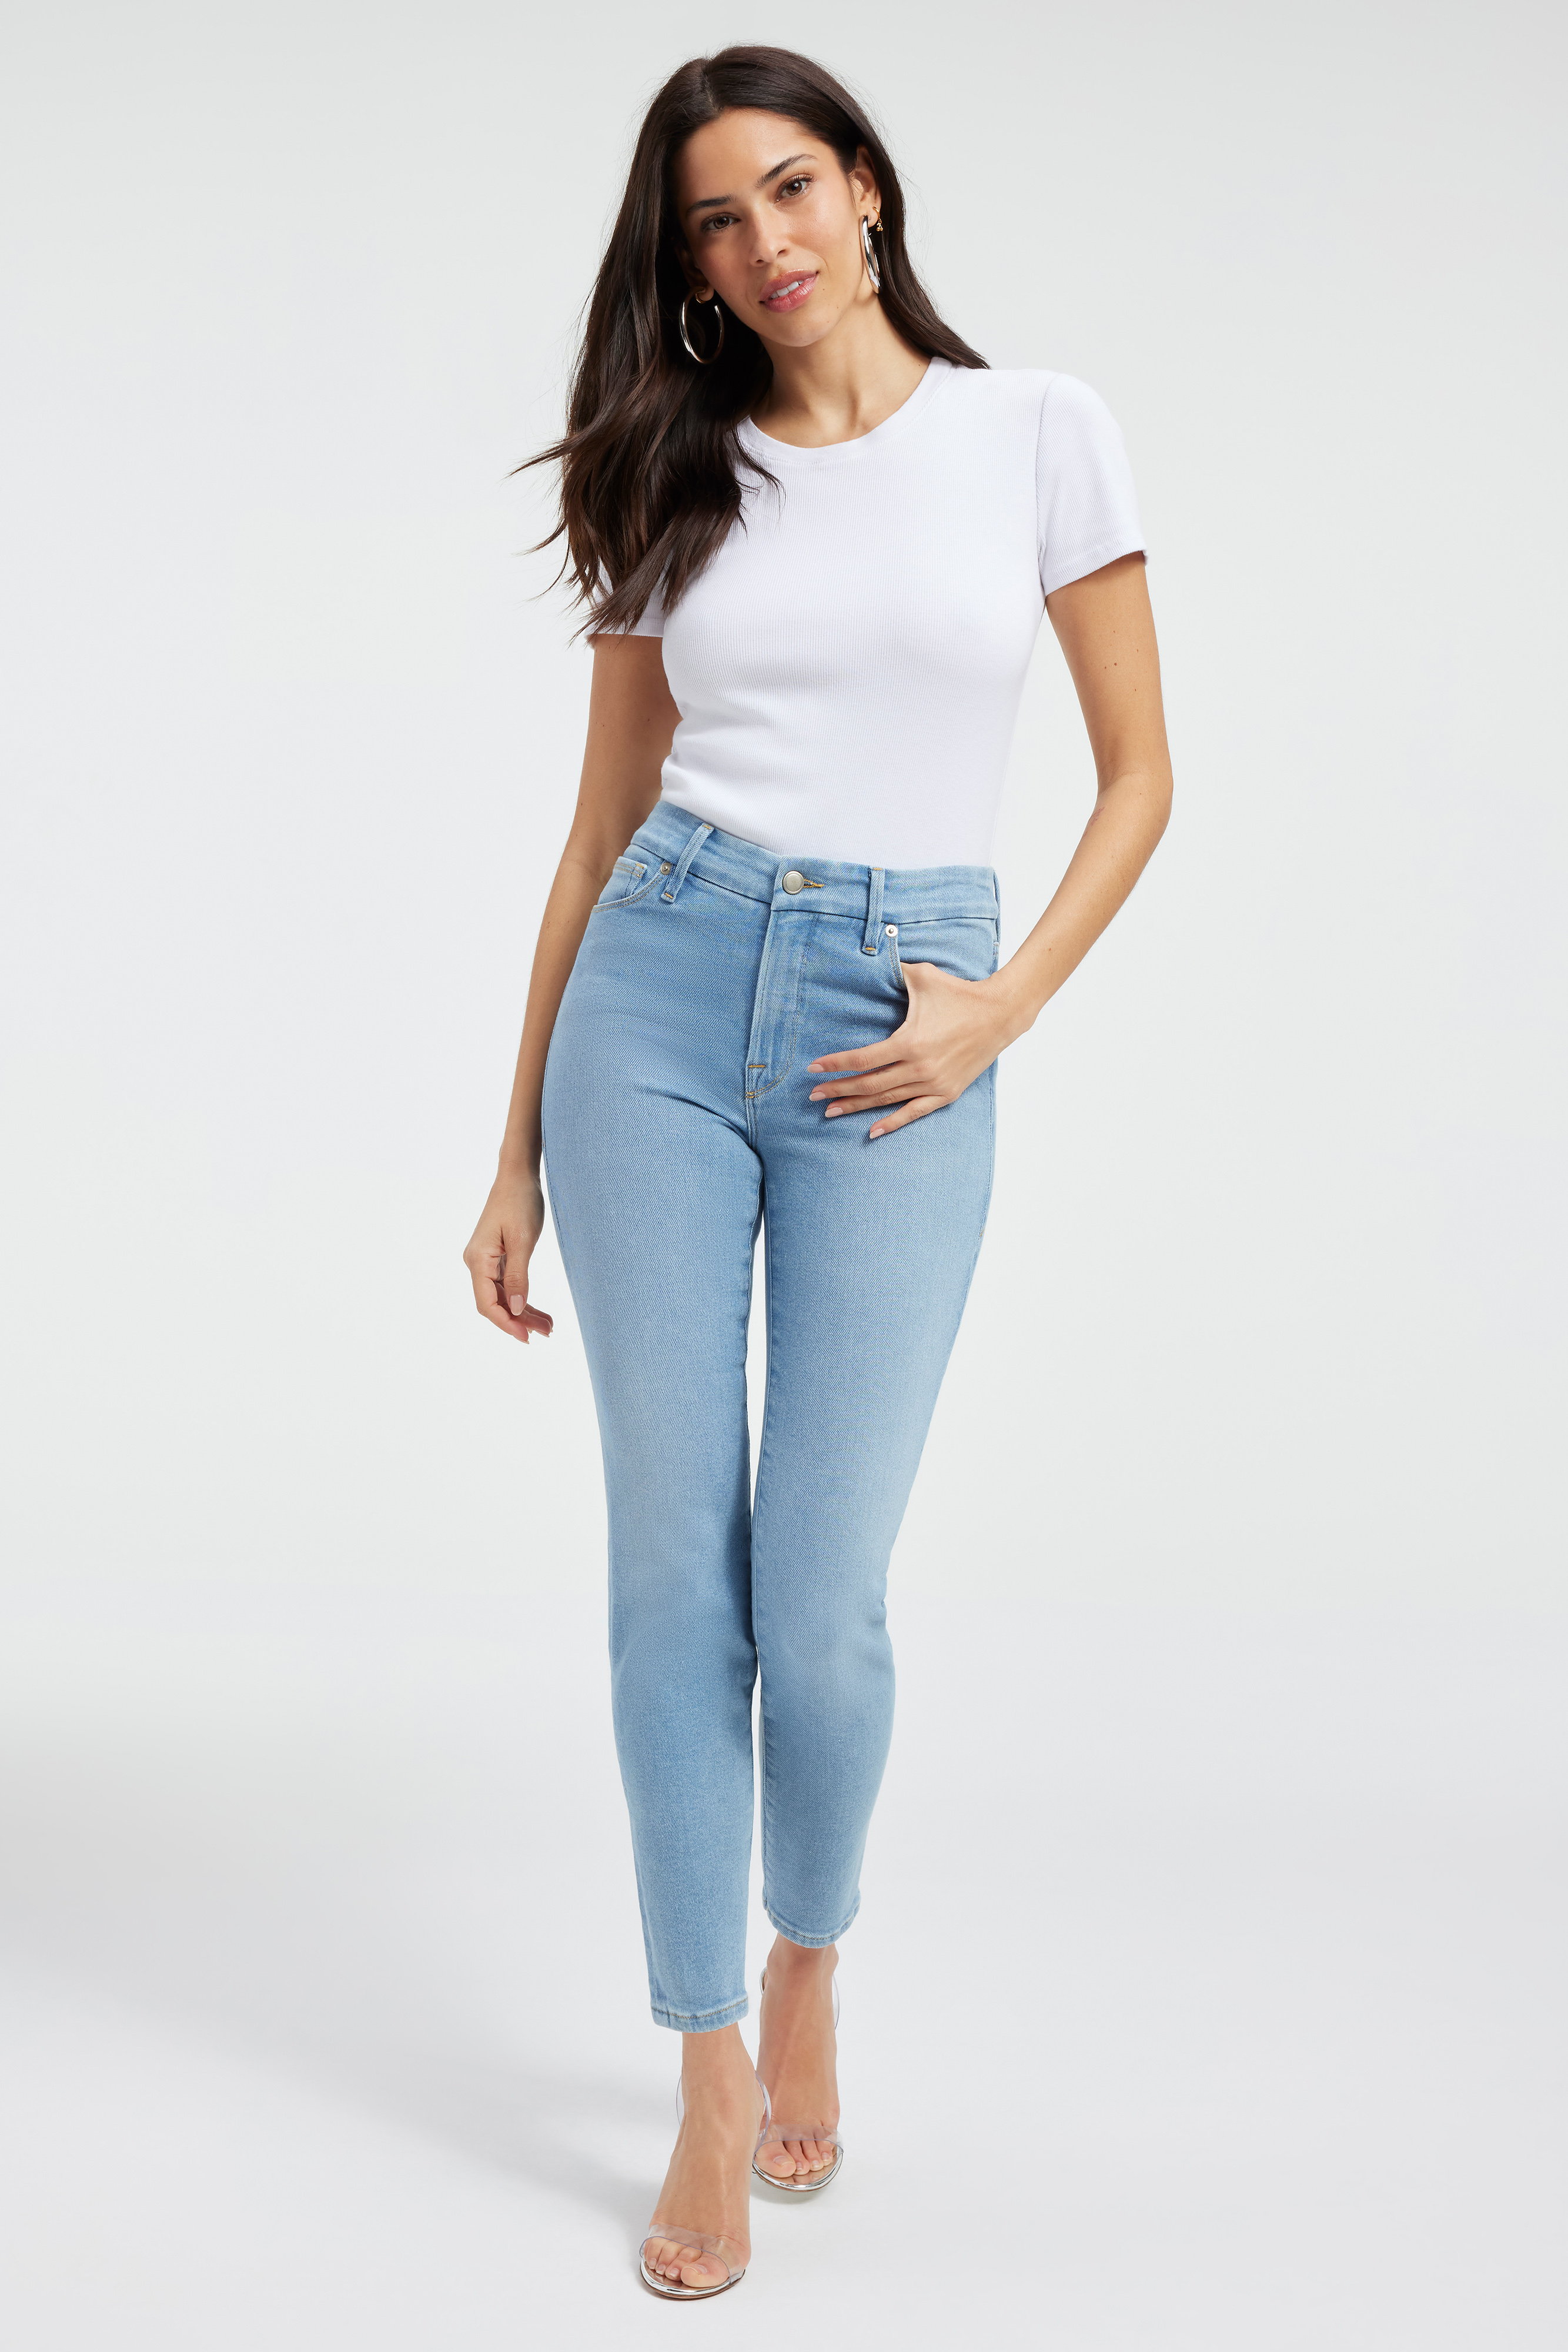 Styled with GOOD LEGS SKINNY JEANS | INDIGO386